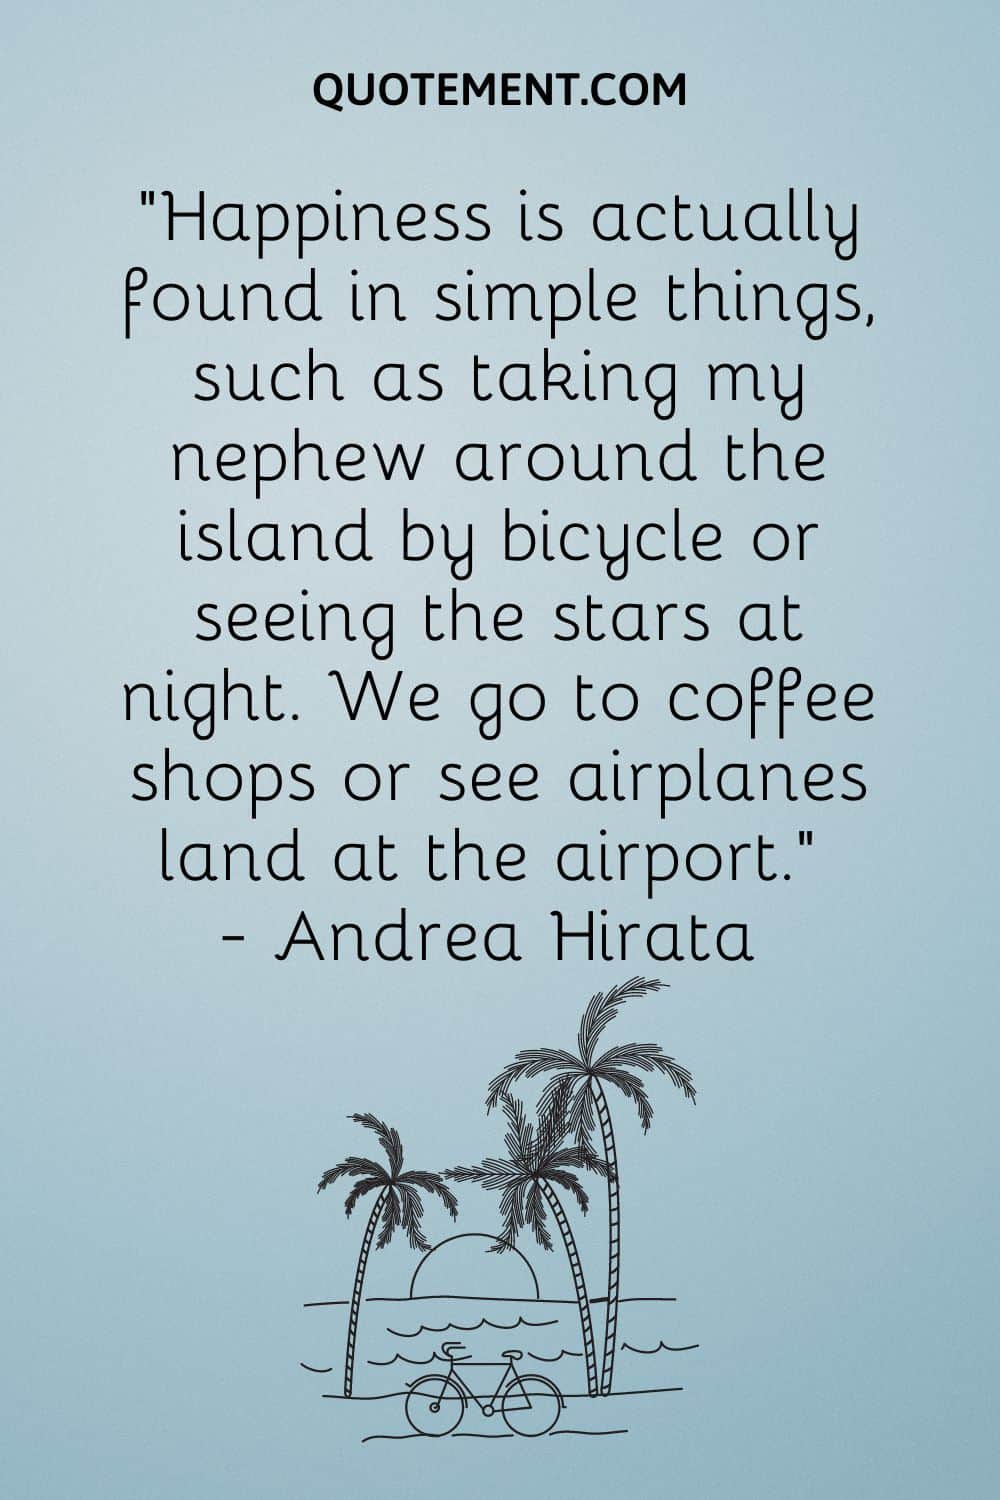 “Happiness is actually found in simple things, such as taking my nephew around the island by bicycle or seeing the stars at night. We go to coffee shops or see airplanes land at the airport.”